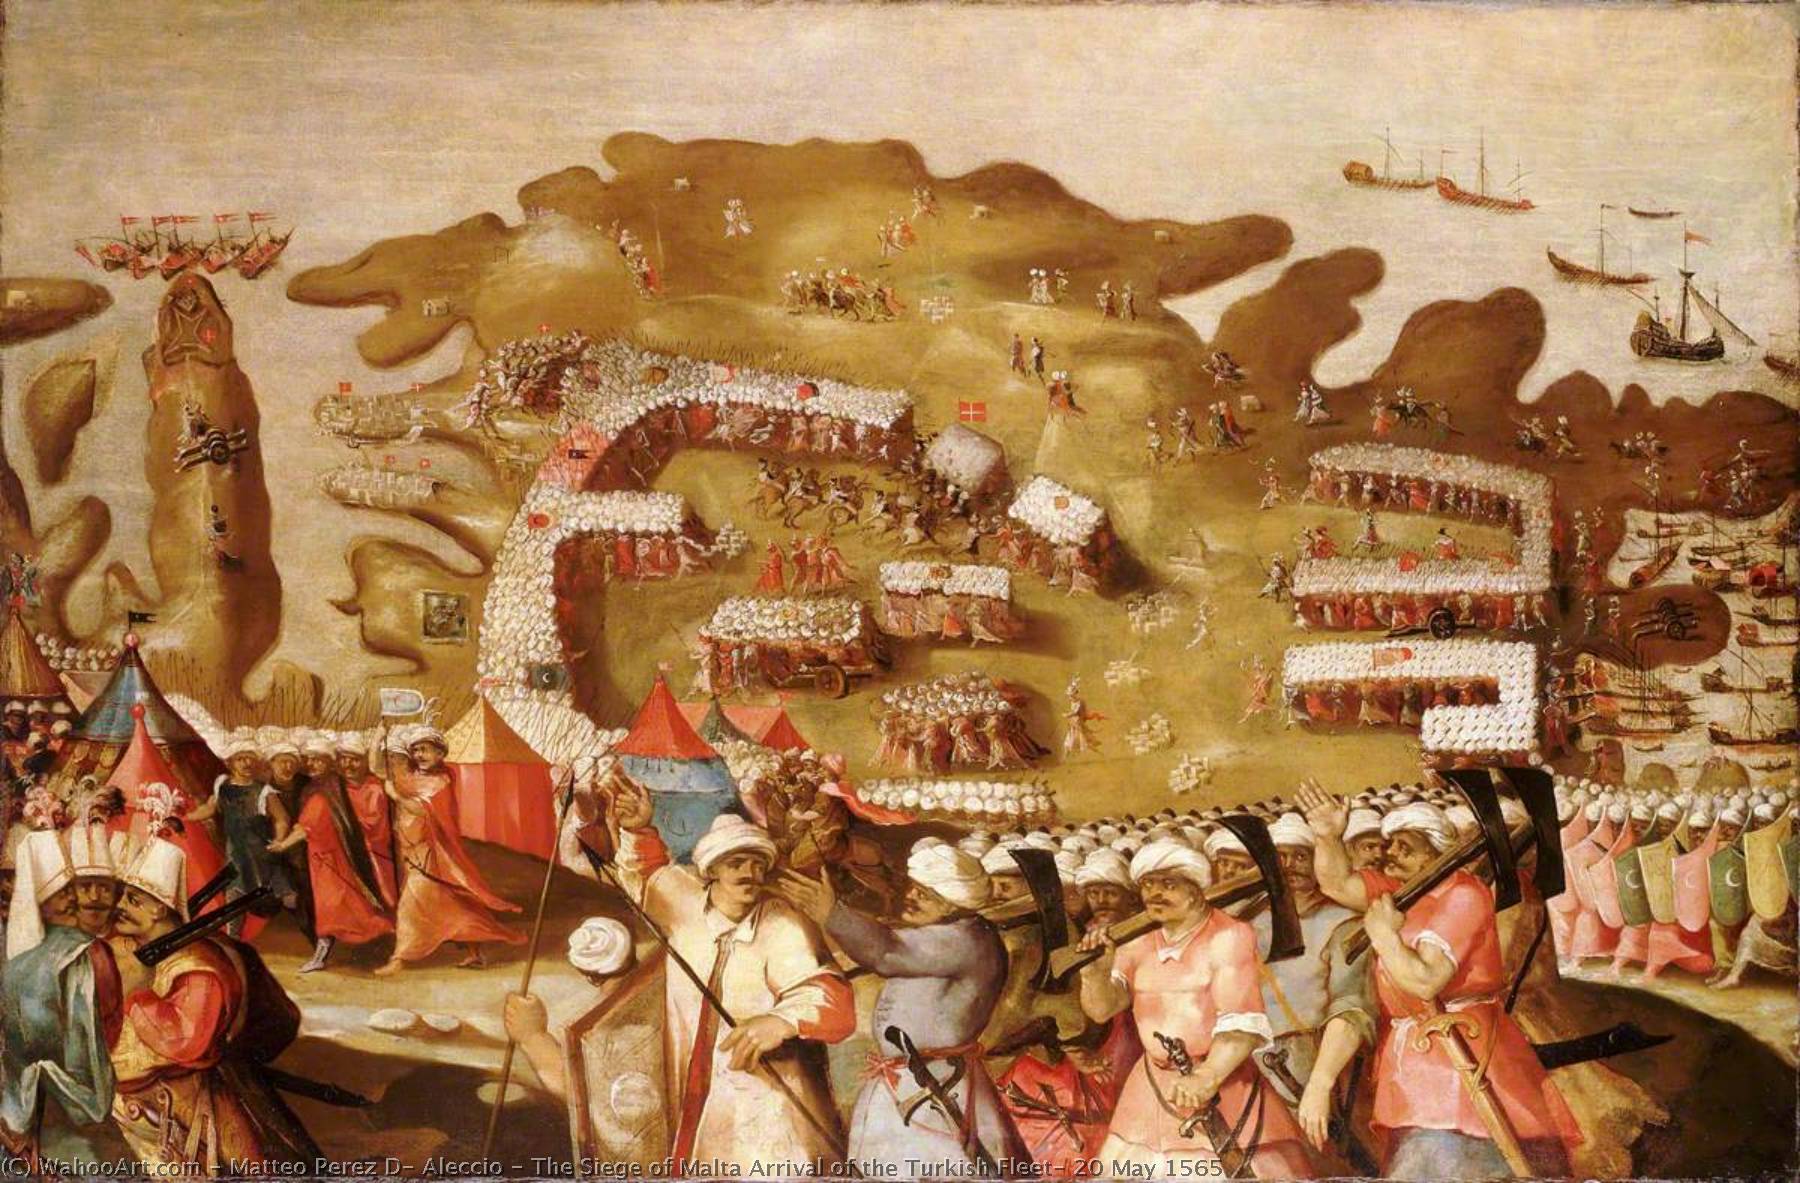 Order Paintings Reproductions The Siege of Malta Arrival of the Turkish Fleet, 20 May 1565 by Matteo Perez D' Aleccio (1547-1628) | ArtsDot.com